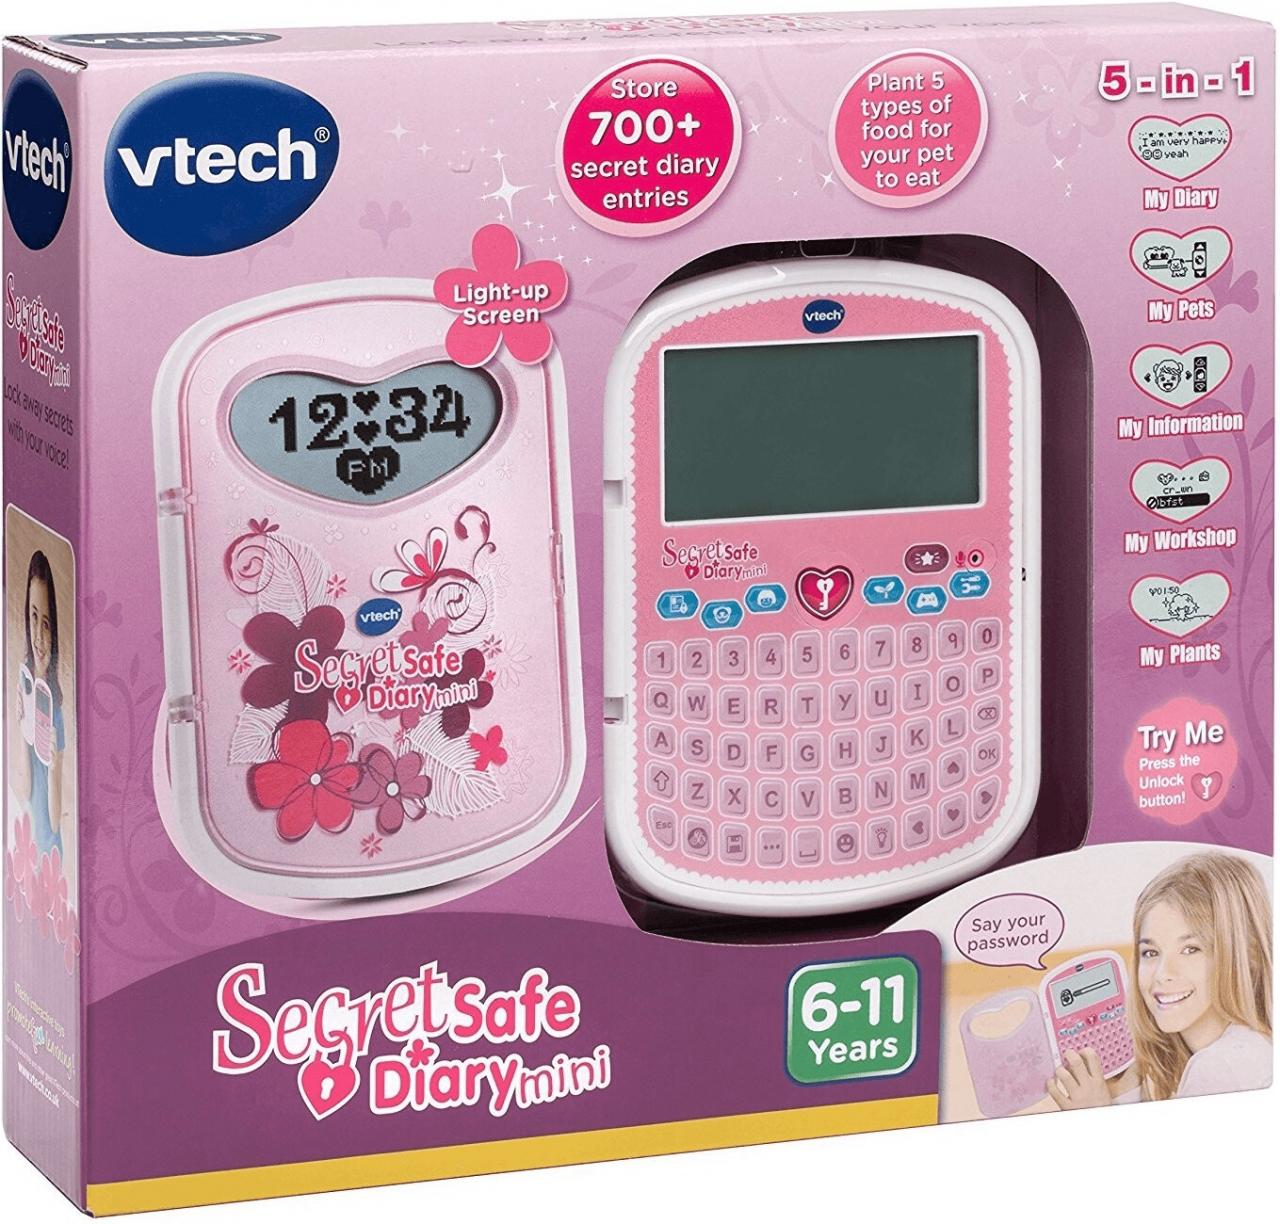 Buy Vtech Secret Safe Diary Mini from £20.00 (Today) Best Deals on